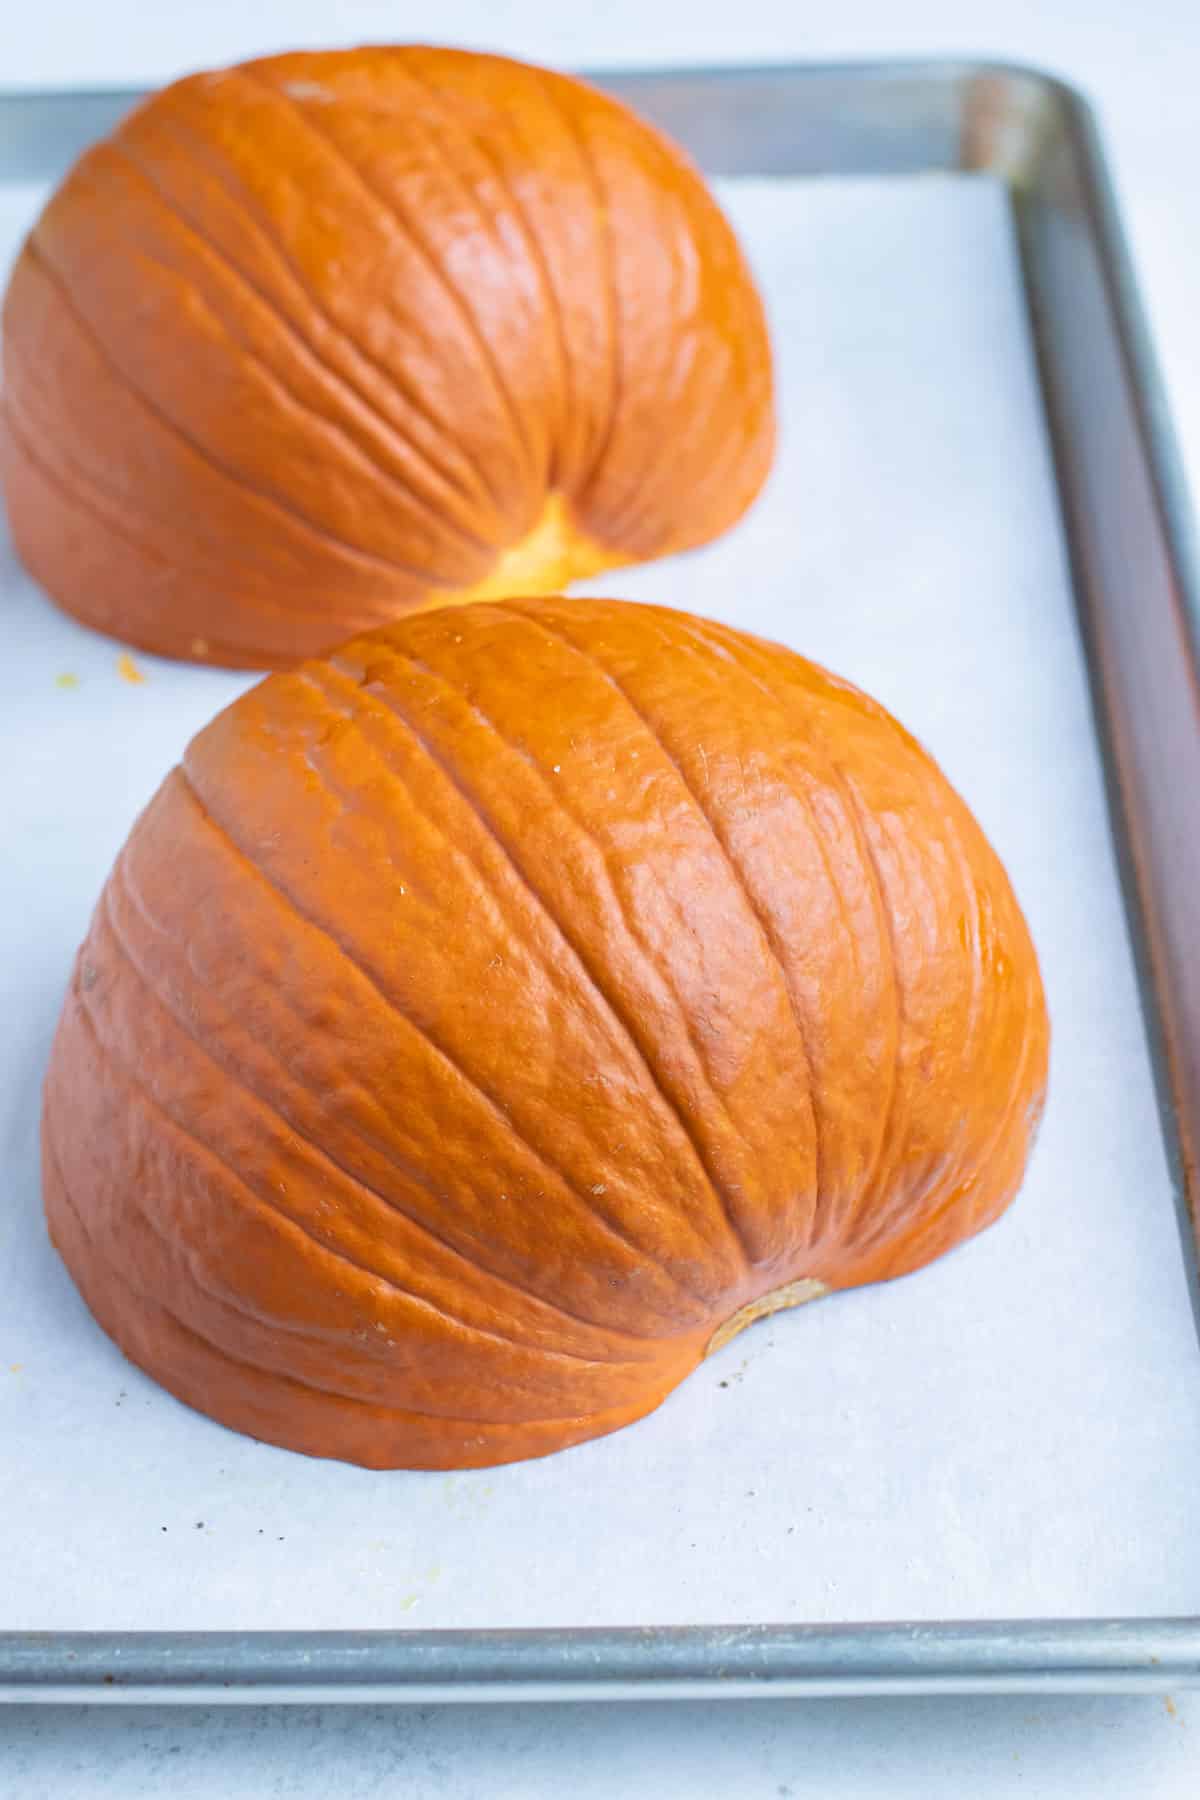 Pumpkin halves are laid hollow-side down on the baking sheet.